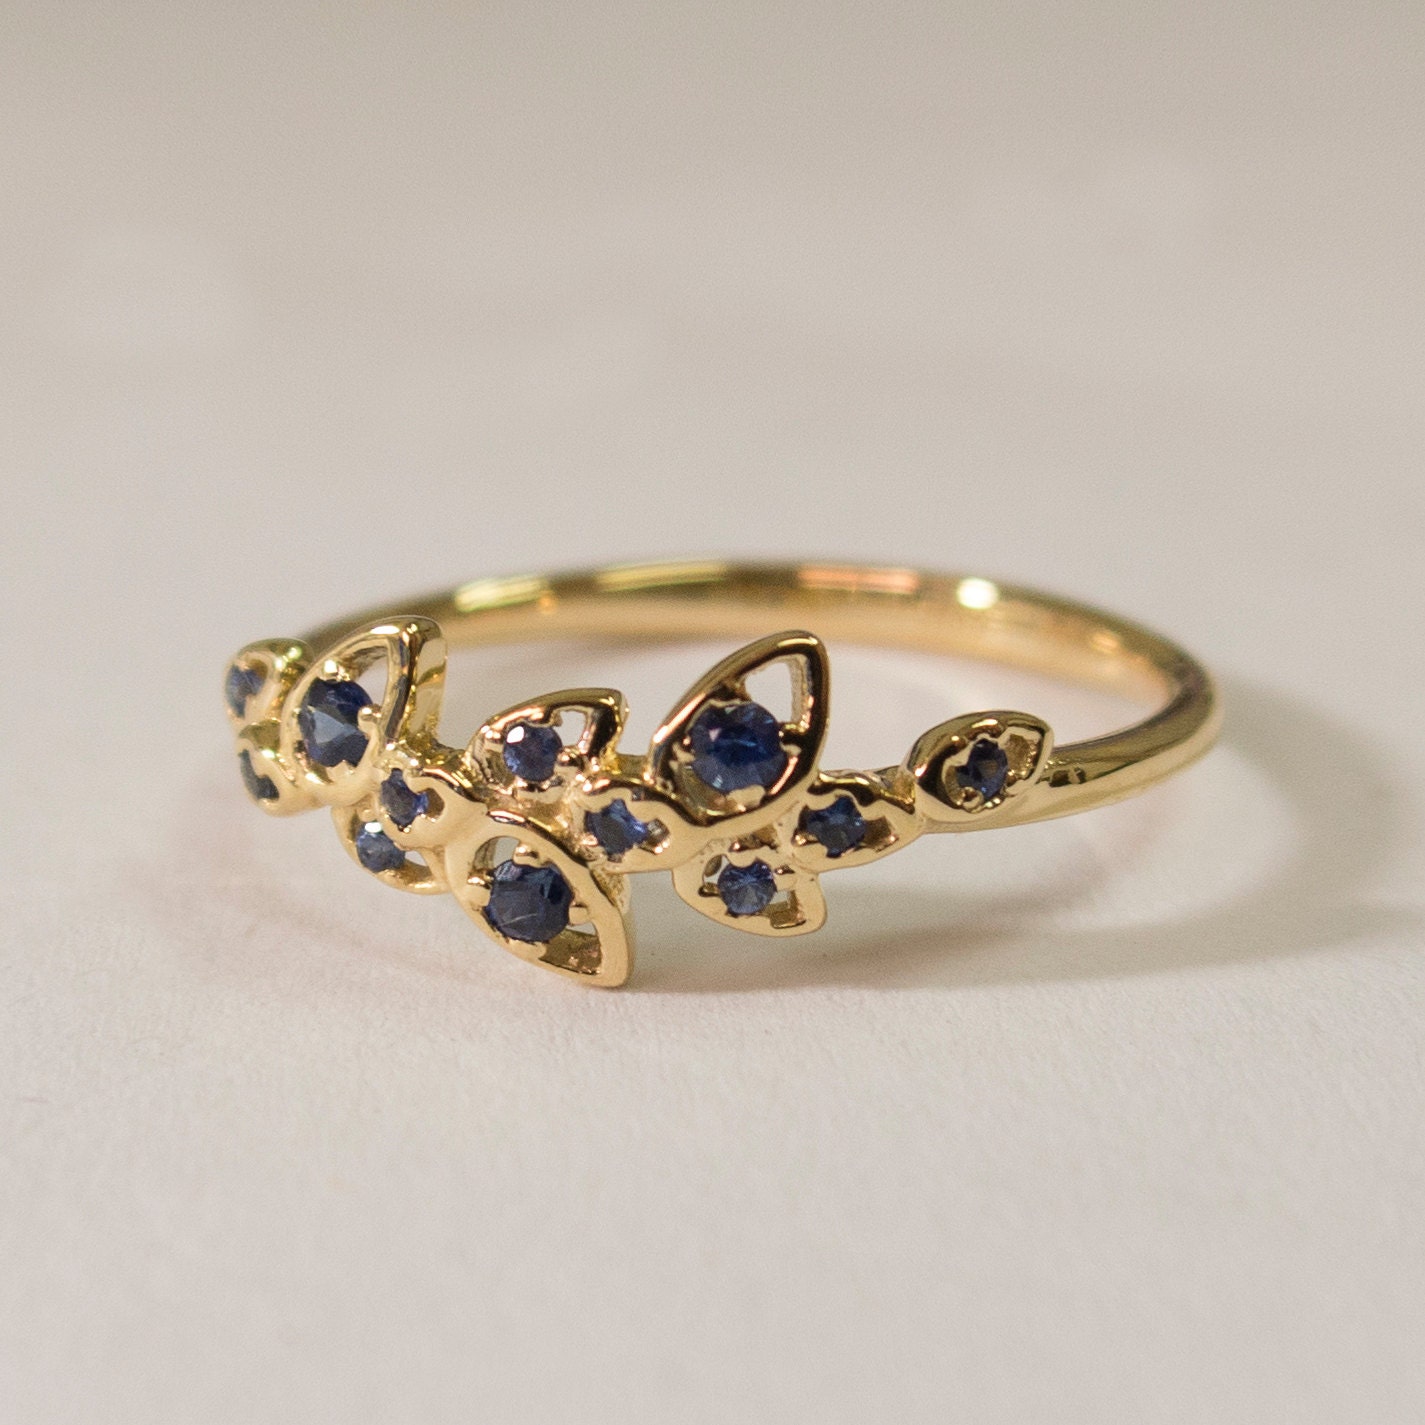 Leaves Engagement Ring 14K Gold and Sapphires engagement